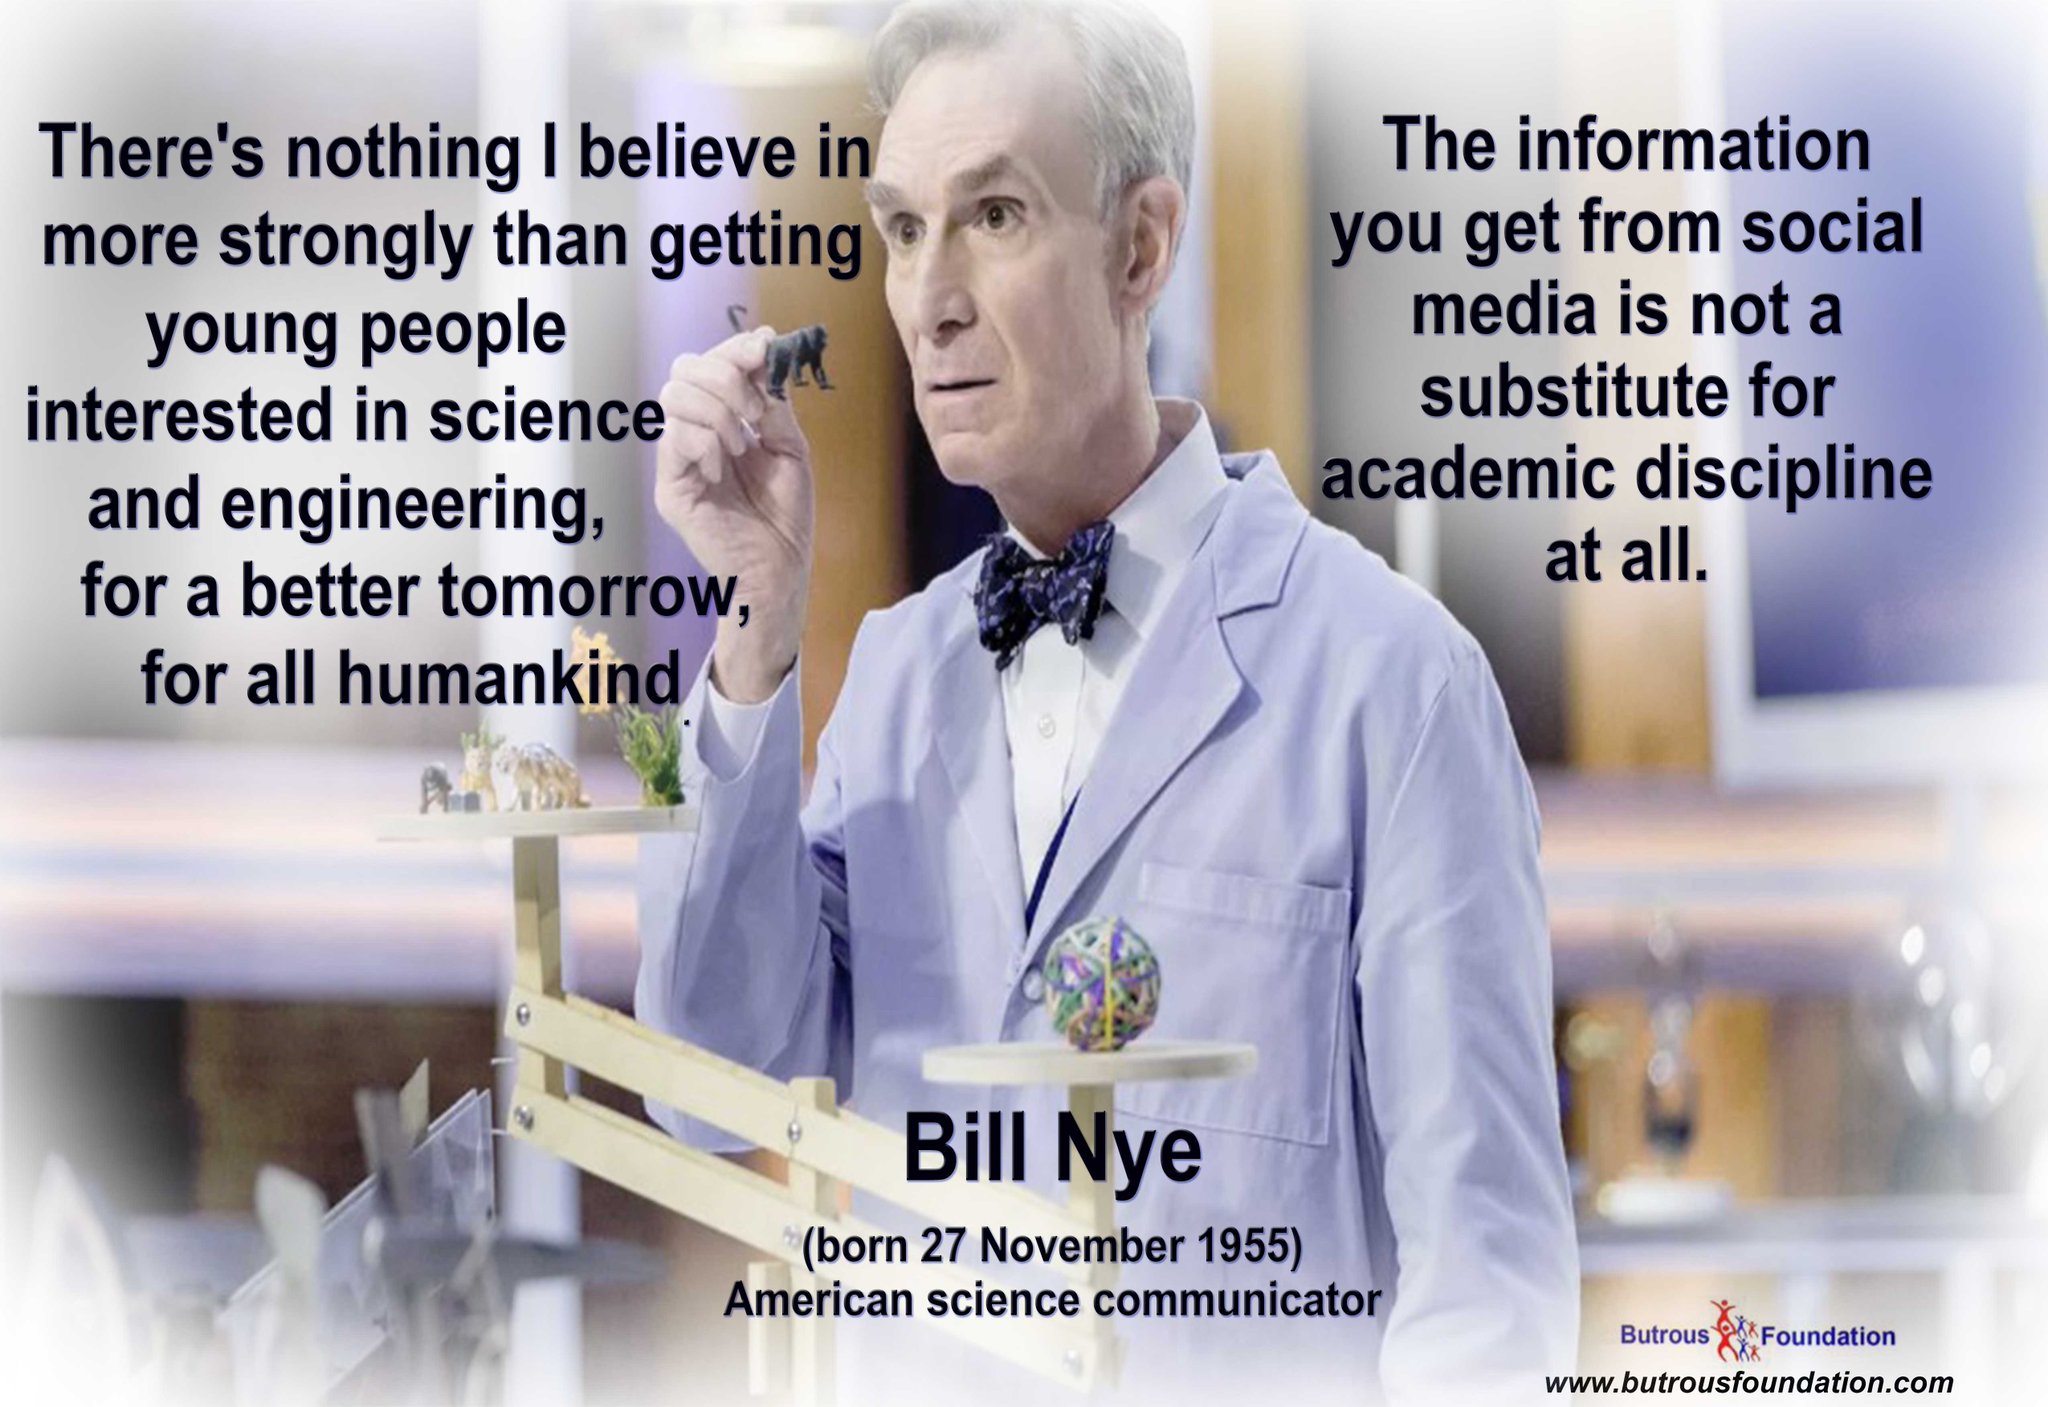 Advice to the Young Scientists from Bill Scaince communicator
Happy 63rd Birthday, Bill 